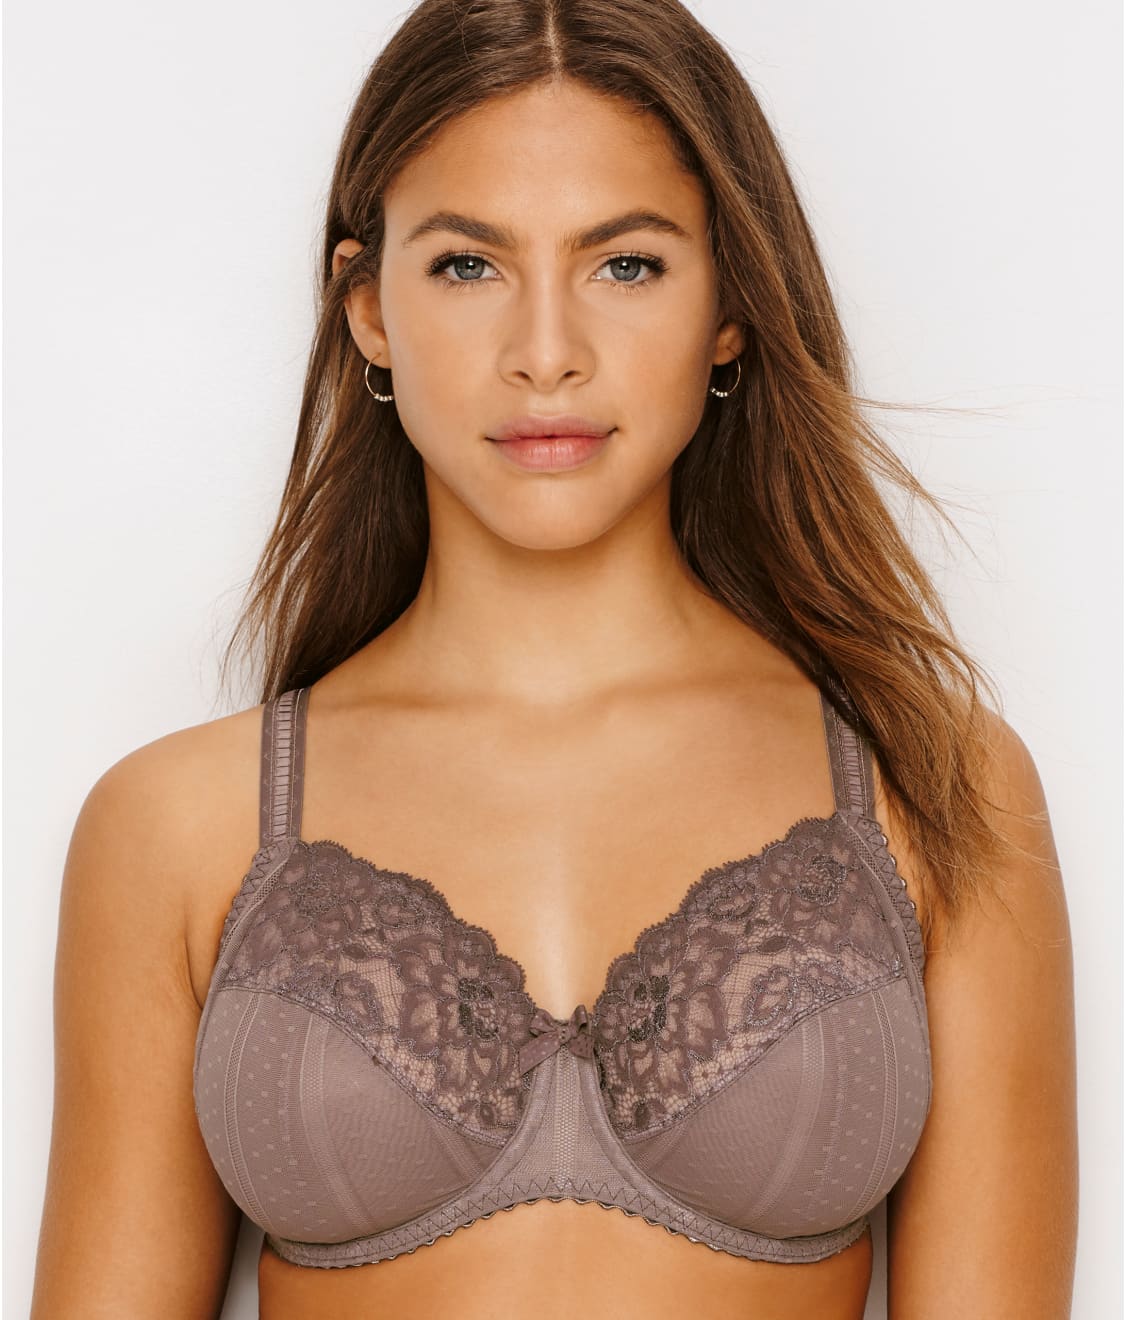 Prima Donna Couture Full Cup Bra & Reviews